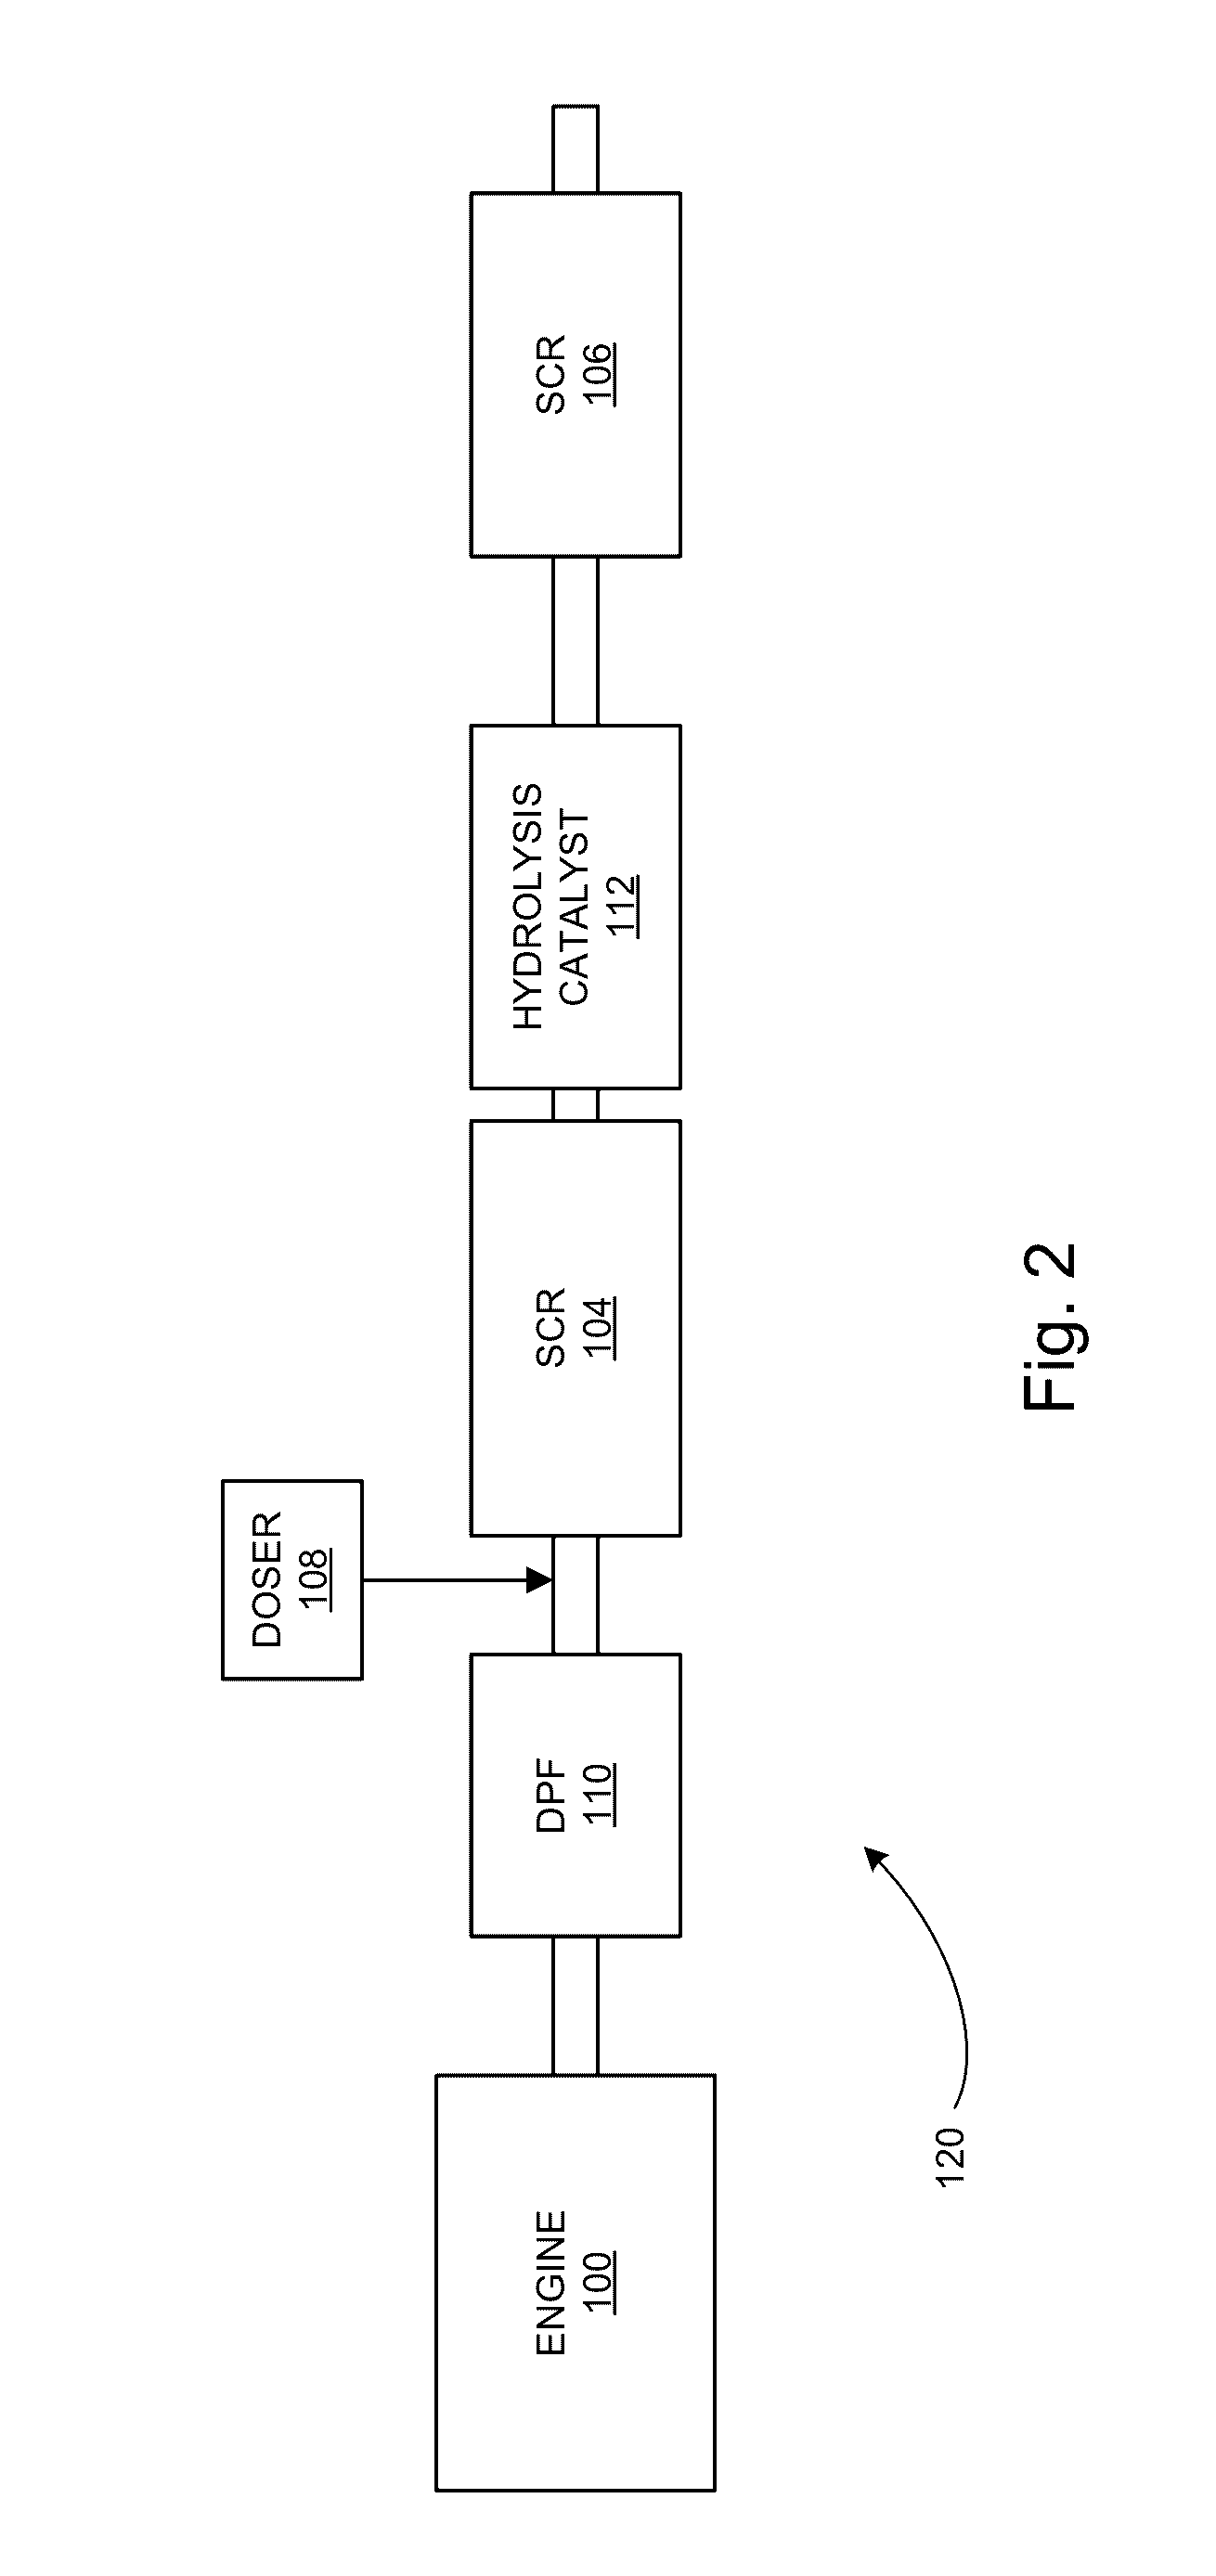 Advanced exhaust aftertreatment system architecture